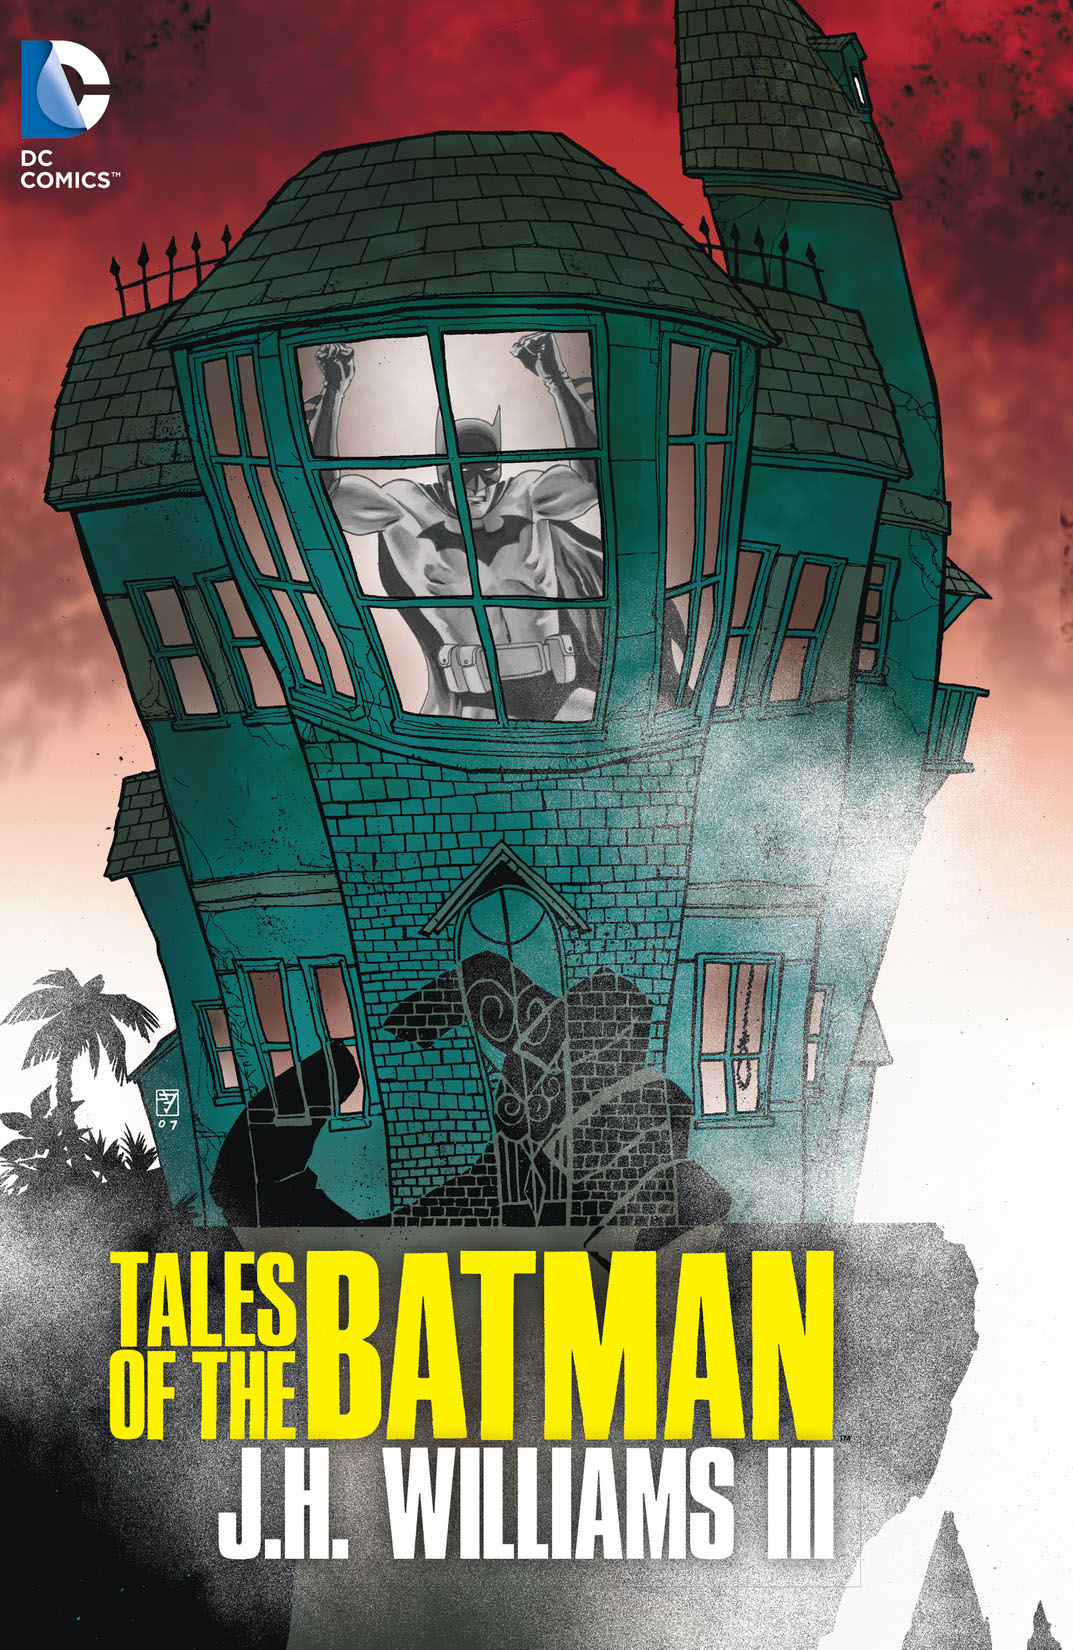 Tales of the Batman: J.H. Williams III preview images